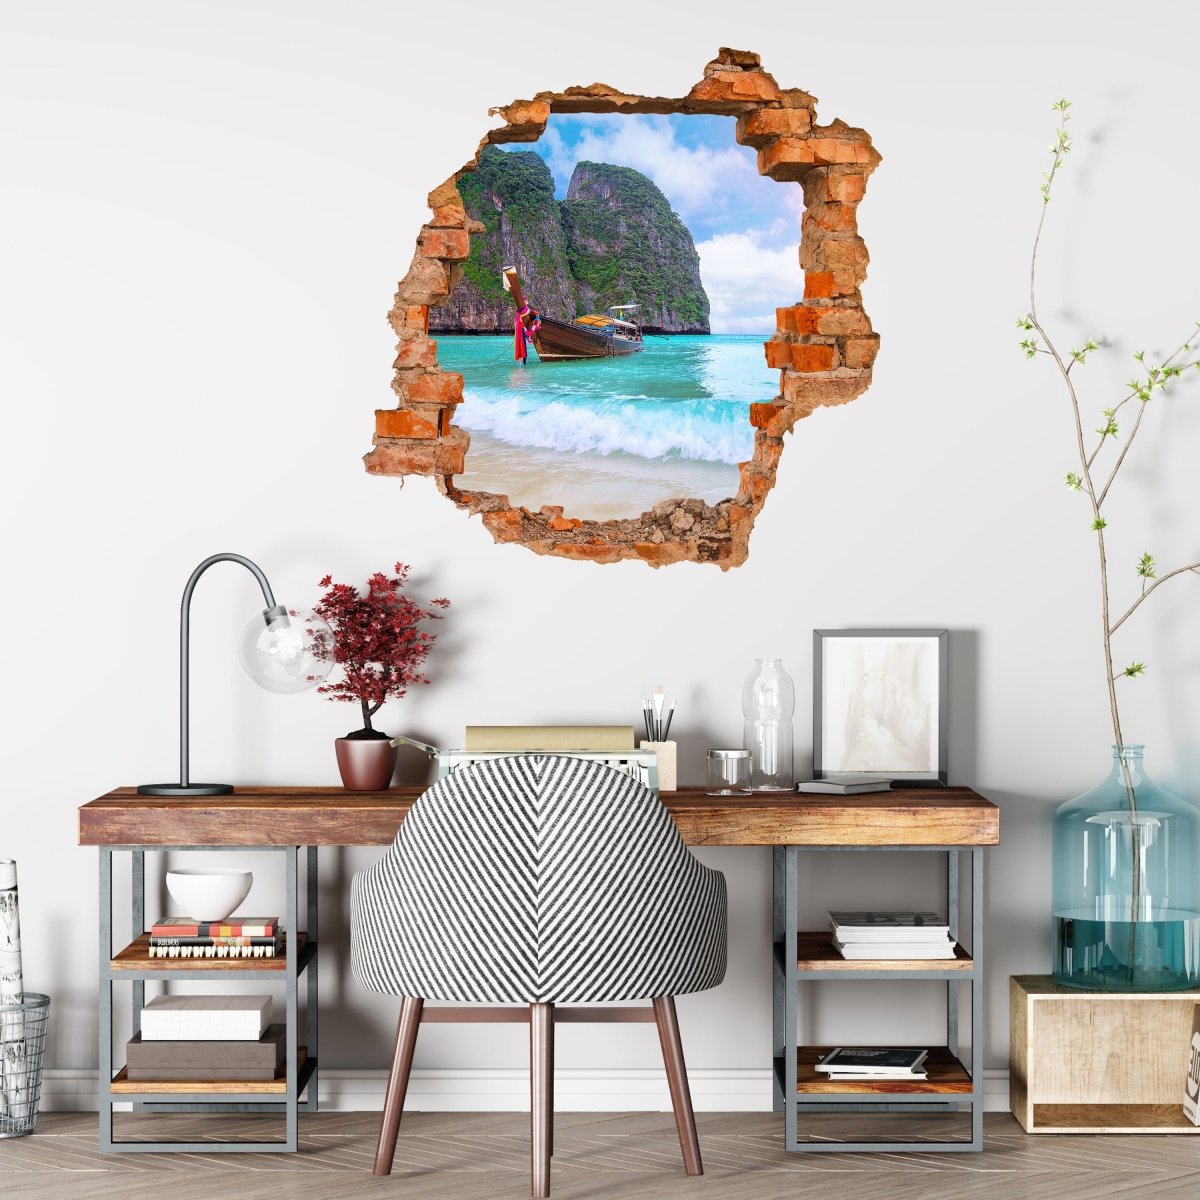 3D Wall Sticker Boat in Phi Phi Island, Thailand - Wall Decal M0856